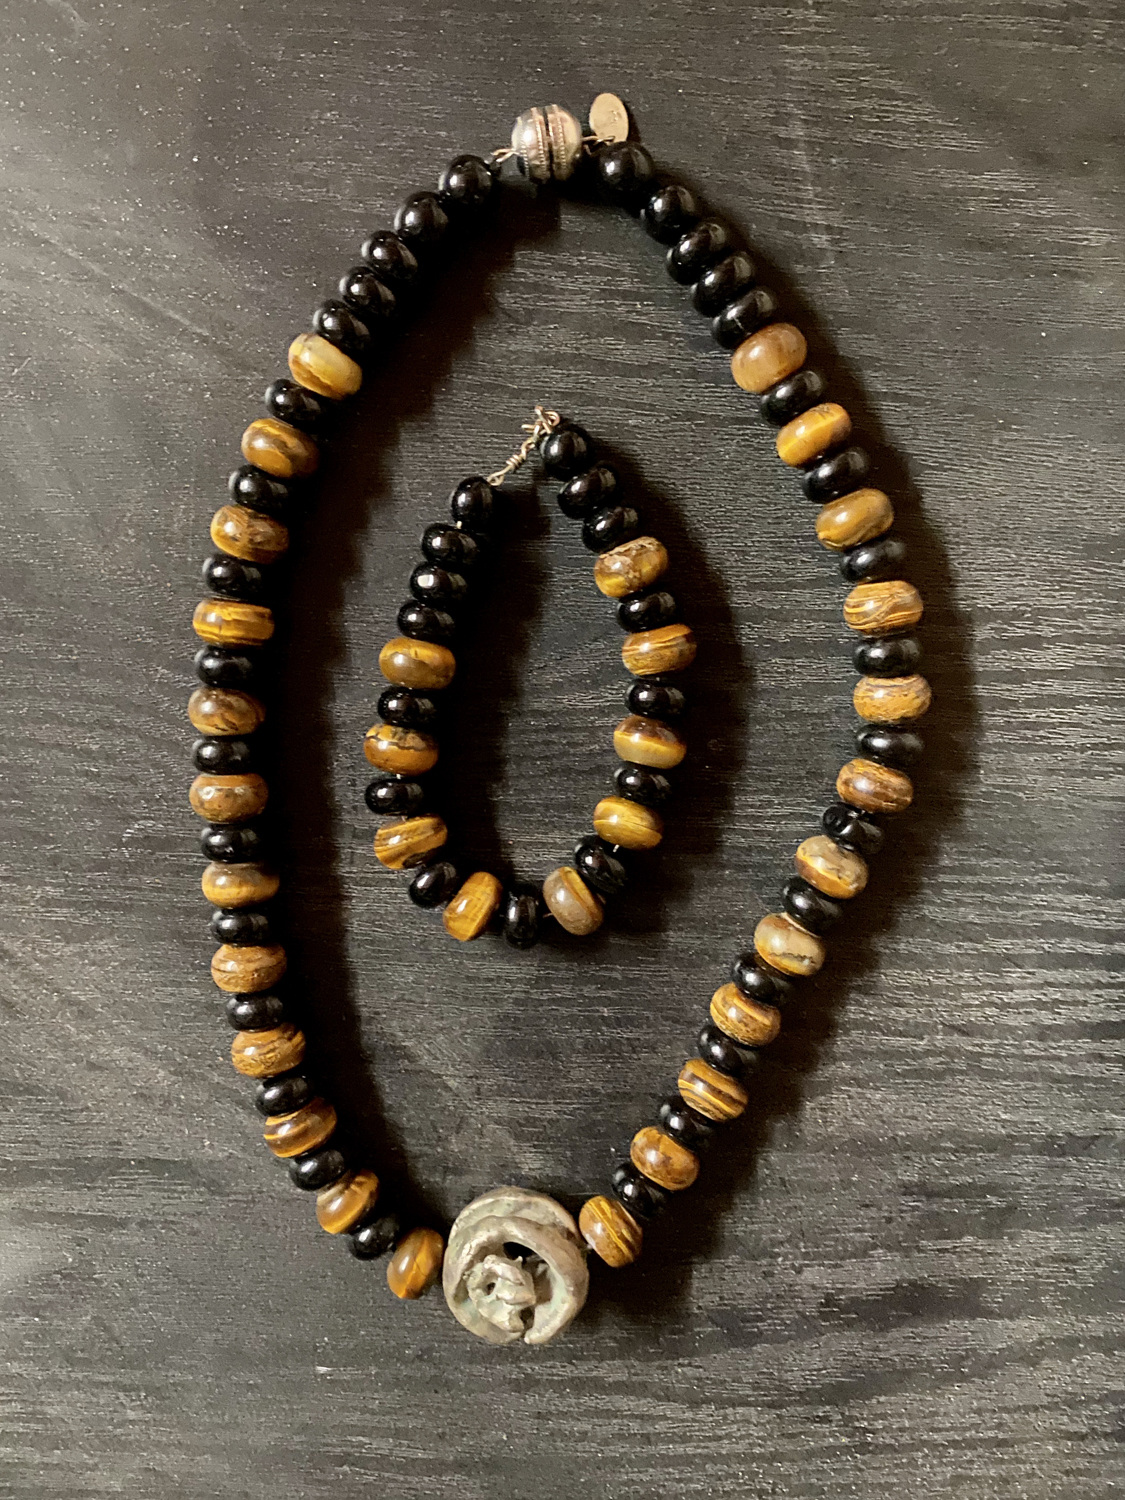 Item 146 - Guttin, Black beads with tigers eye necklace and bracelet